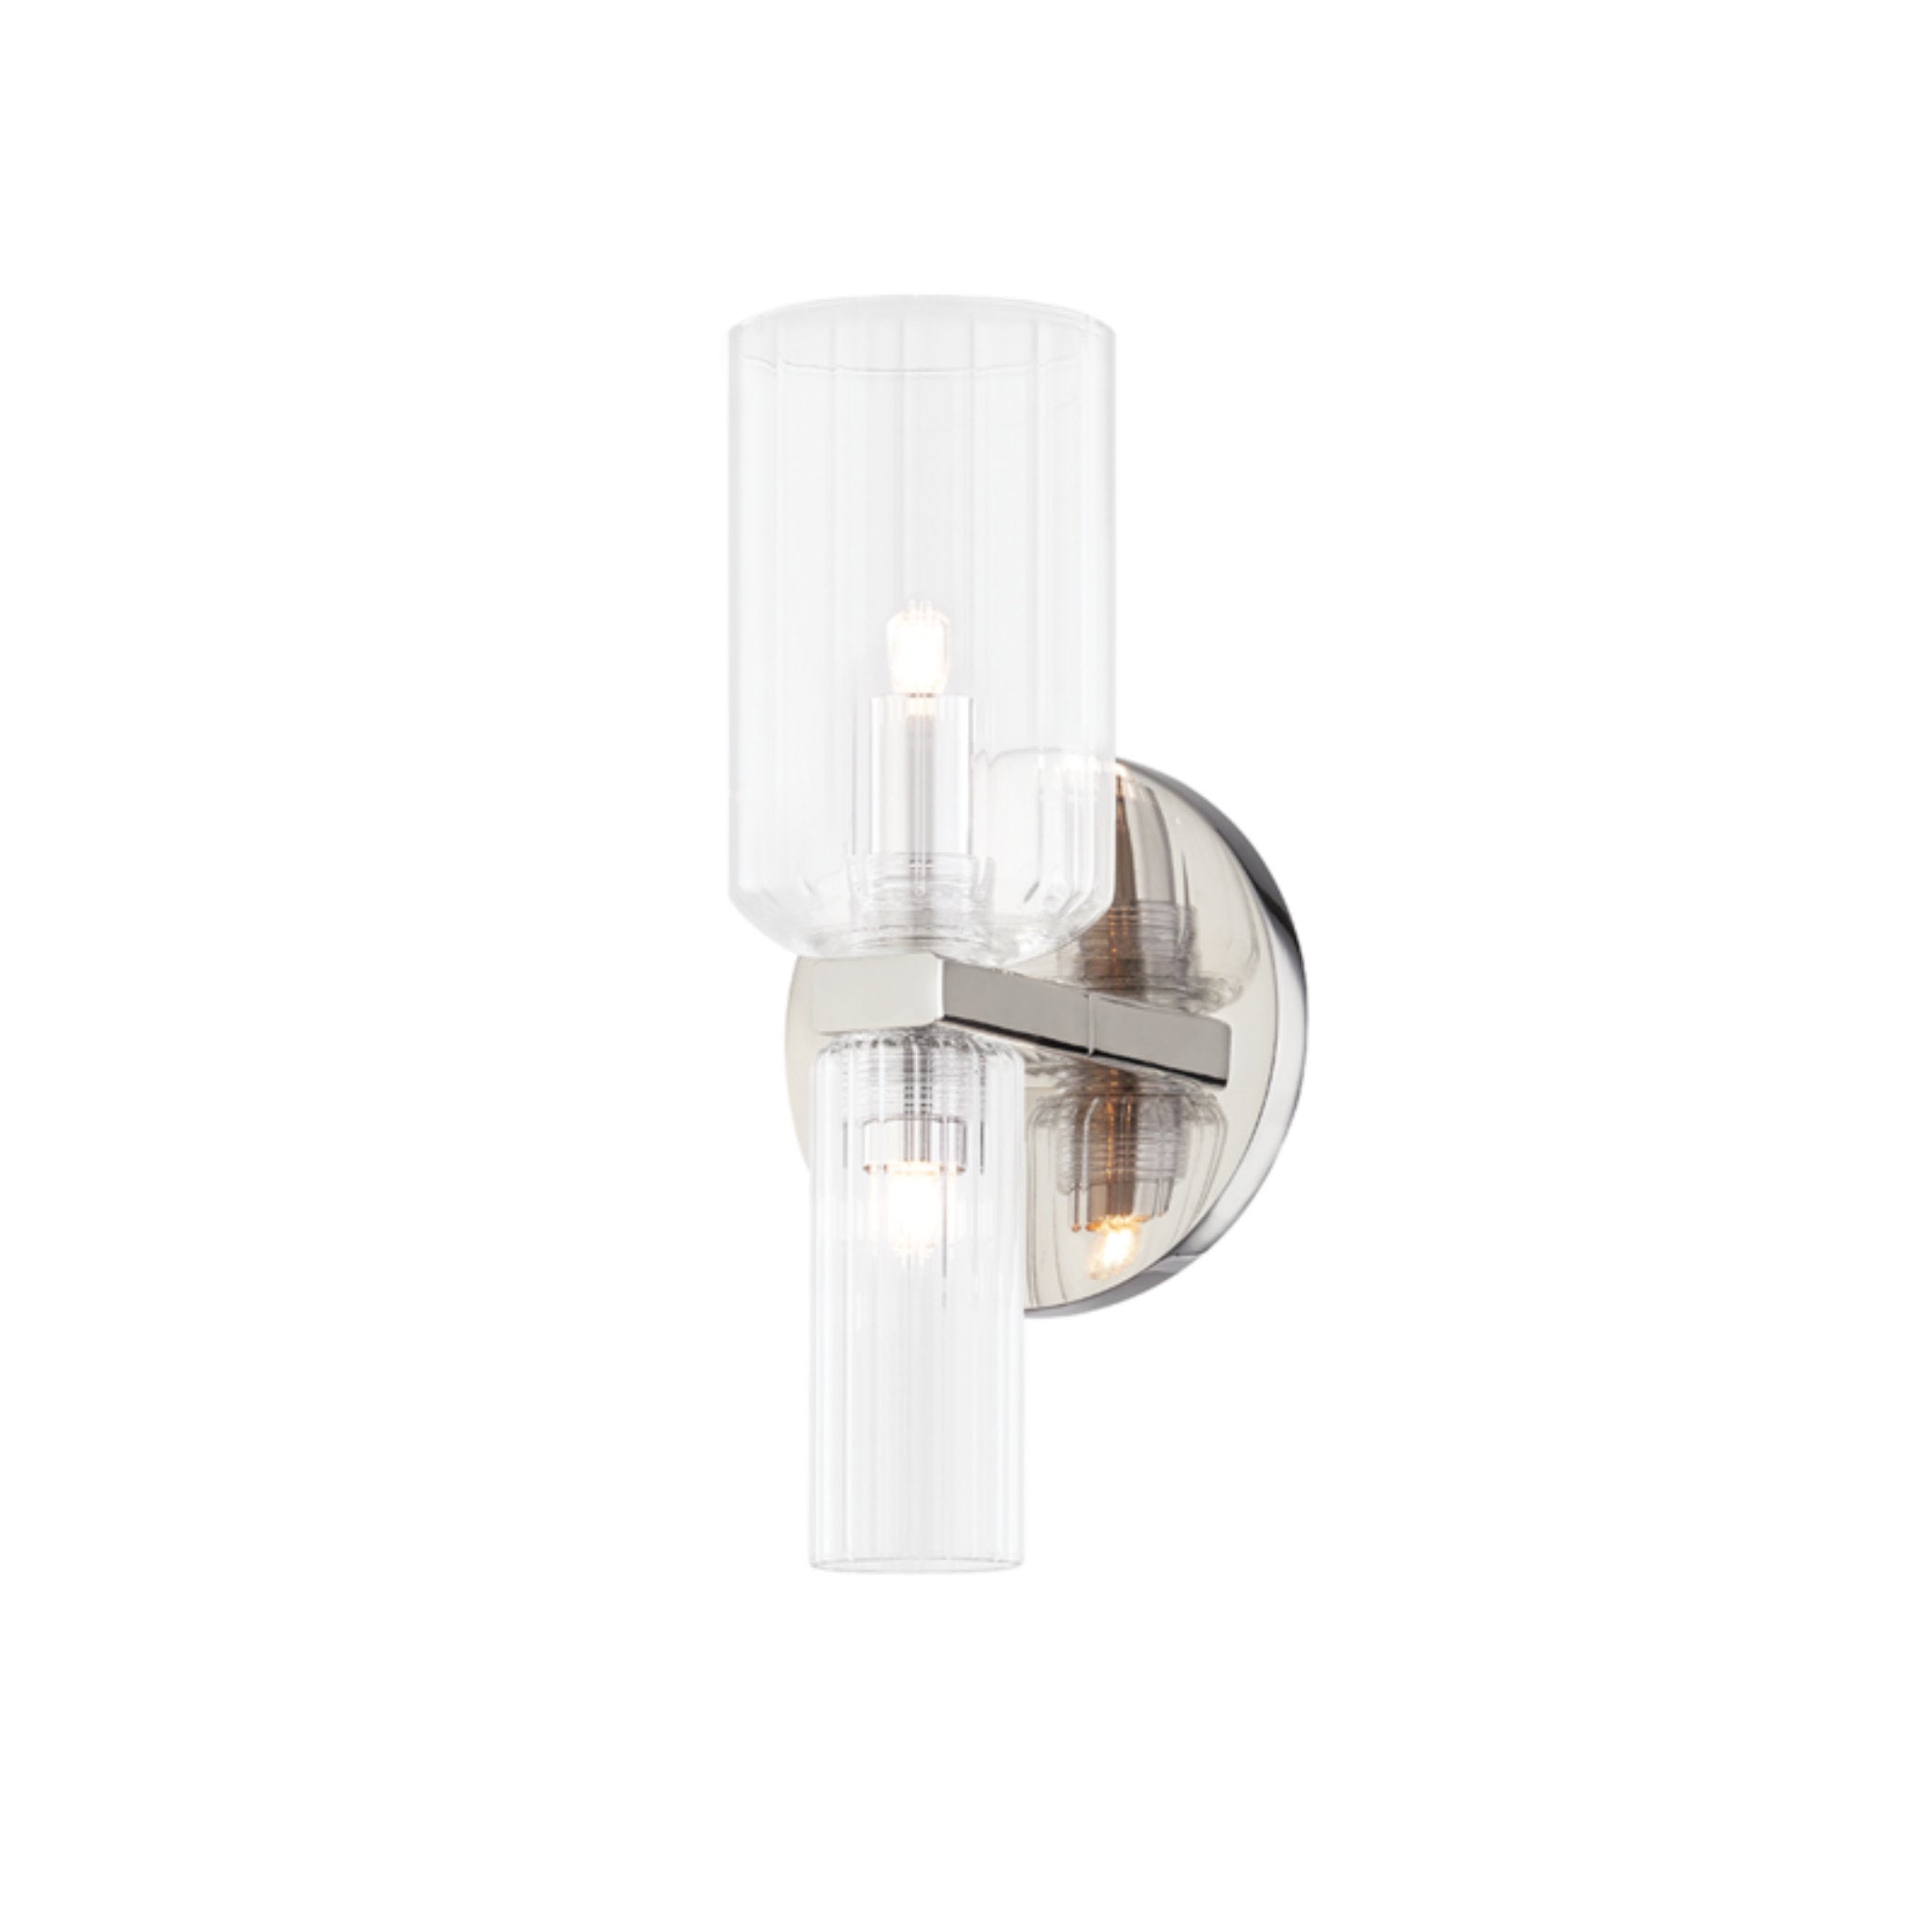 Tabitha 2-Light Wall Sconce in Polished Nickel